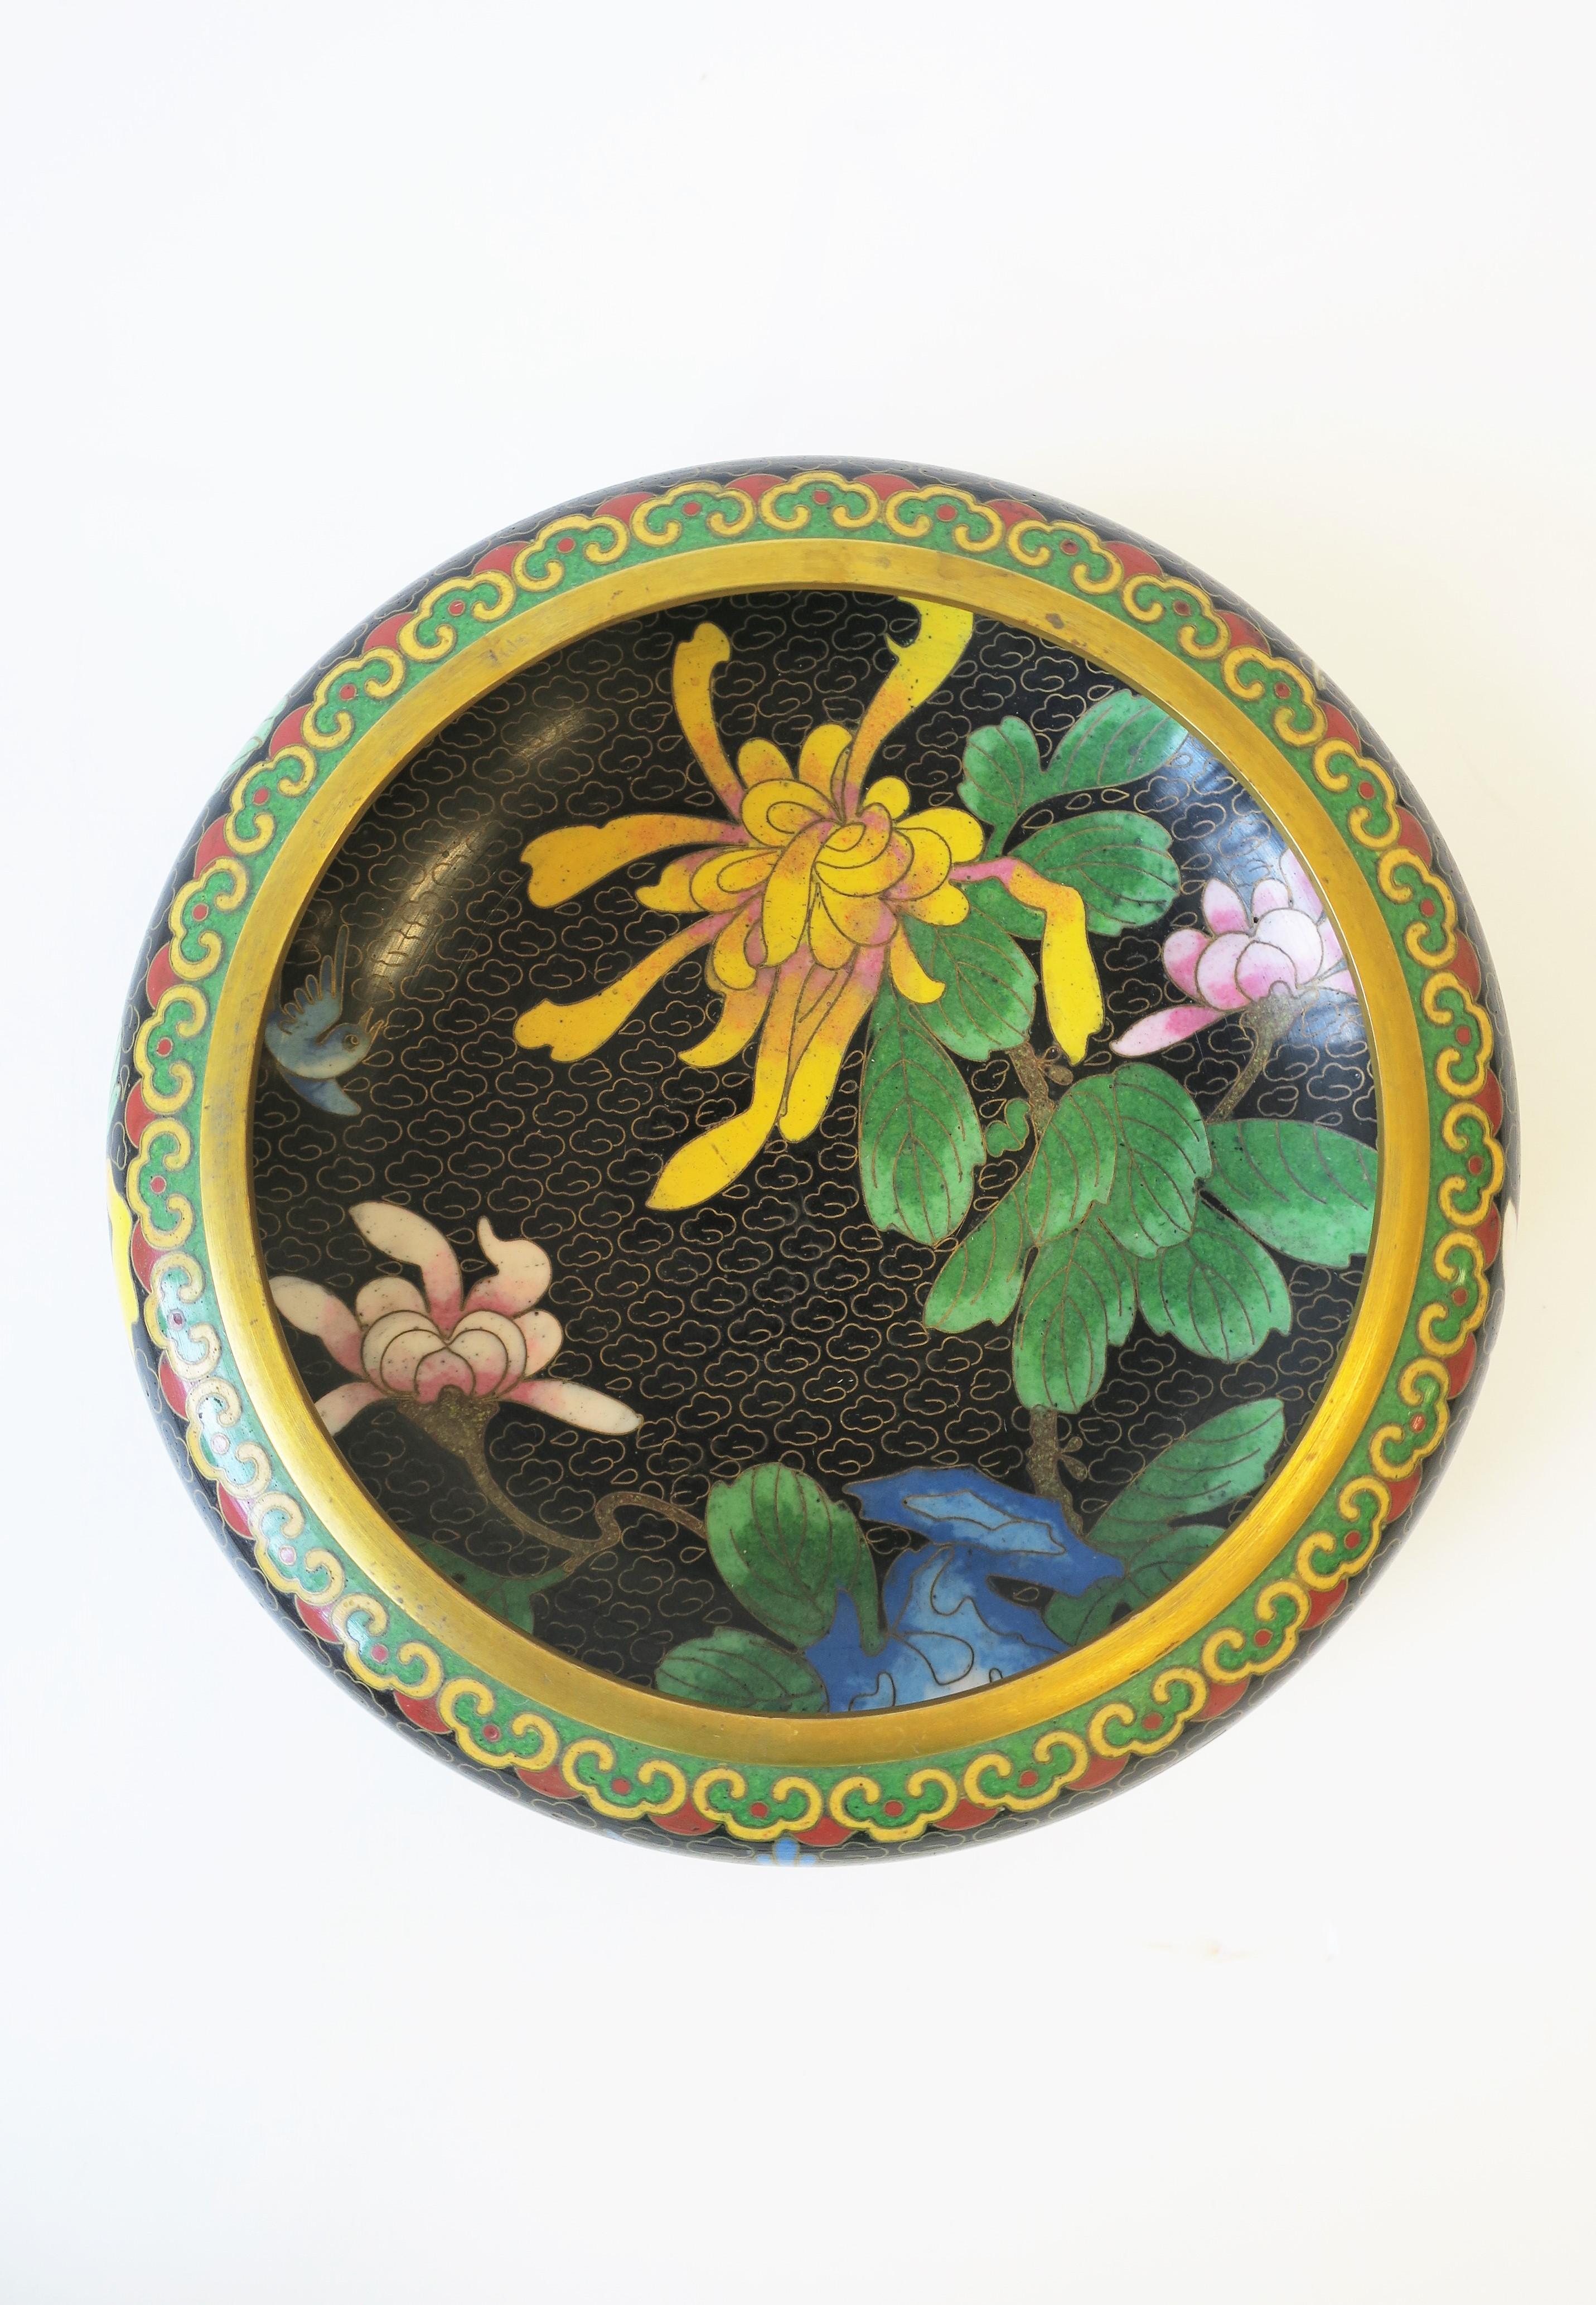 A beautiful, striking, and colorful vintage cloisonné enamel and brass bowl with spider chrysanthemum flowers and bird design, circa 1960s, 1970s, Asia, China. Beautifully made brass metal and enamel work. Enamel bowl depicts flowers, leaves and